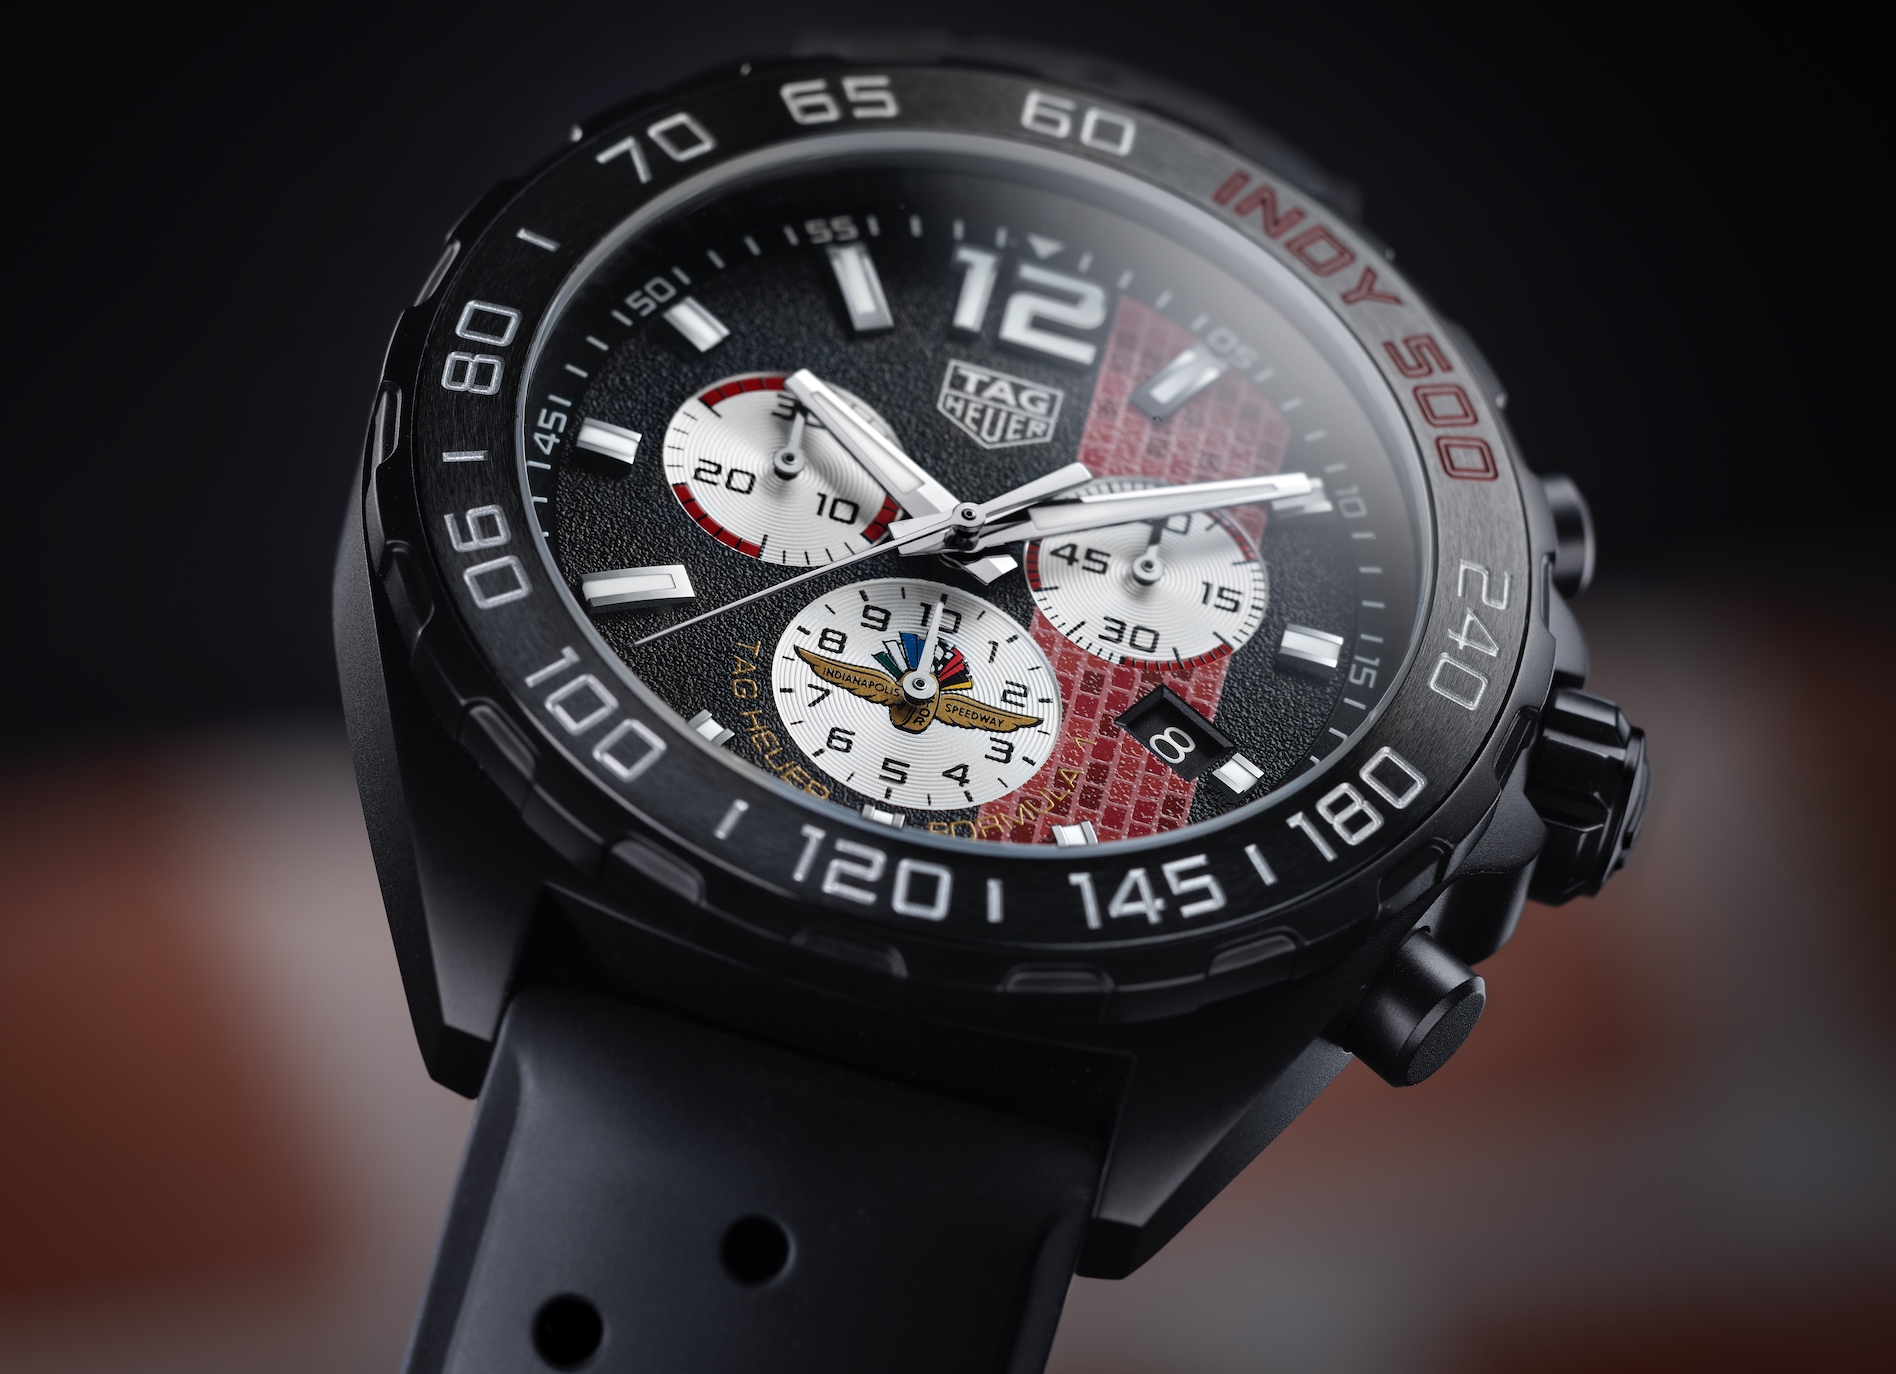 aria-label="TAG Heuer Indy500 Hero"